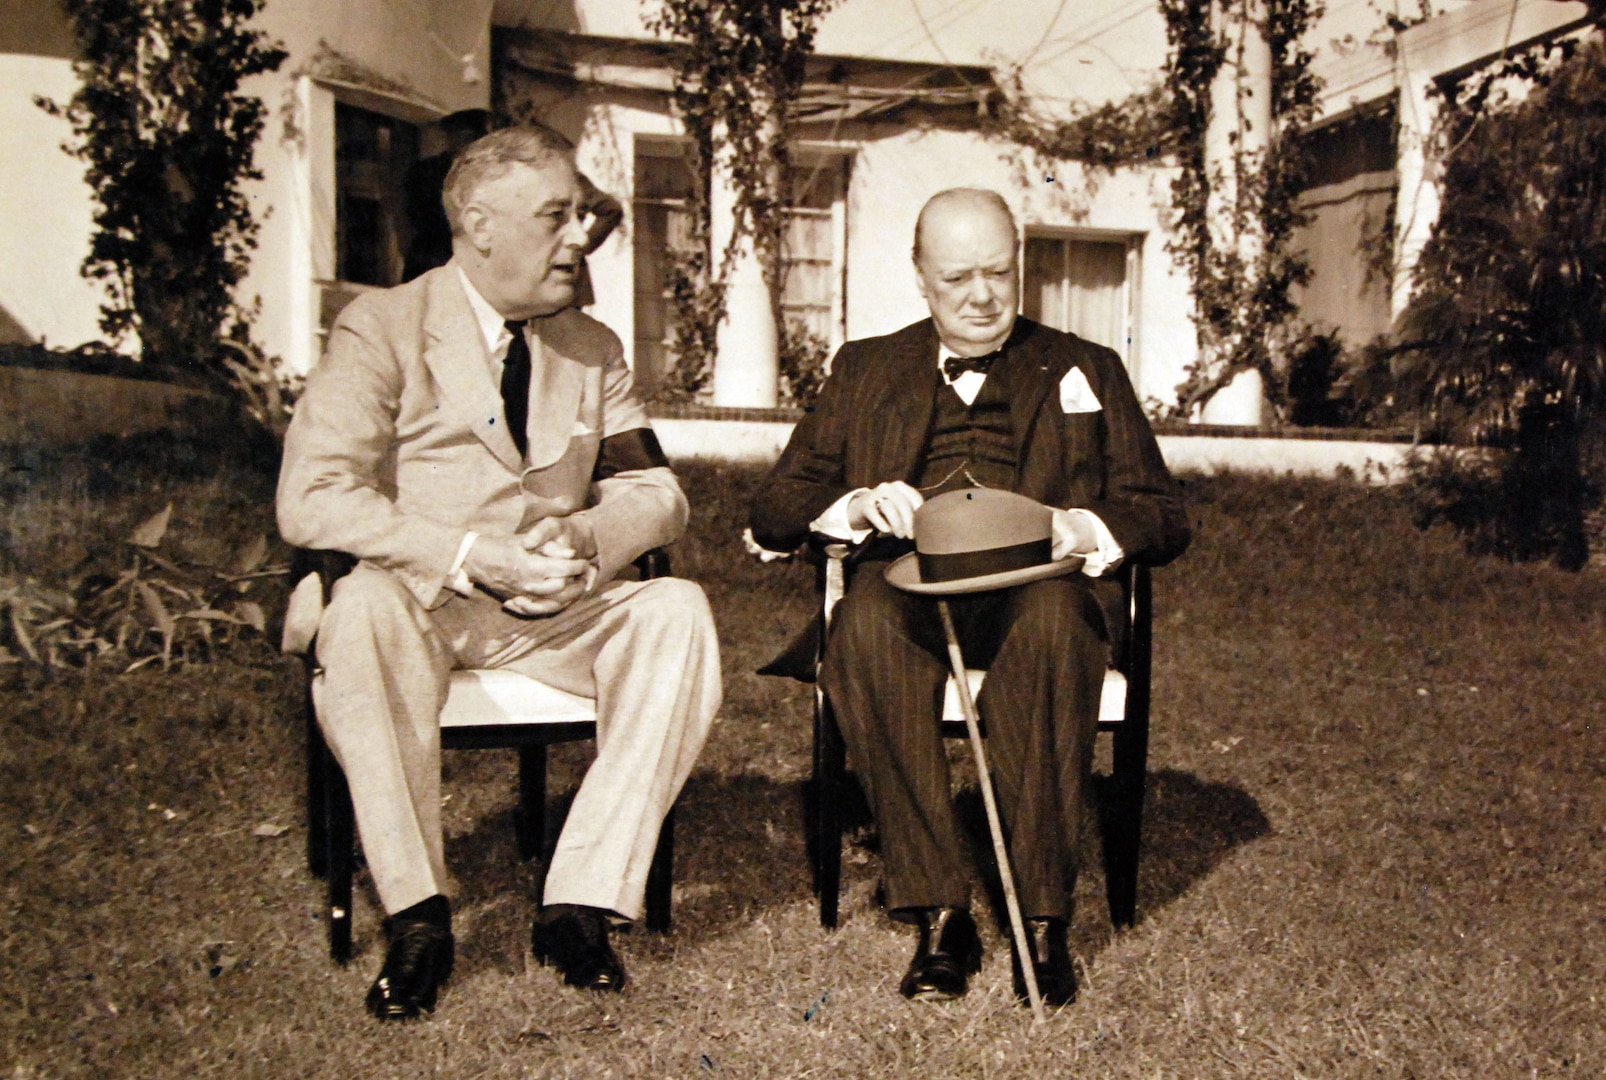 President Franklin D. Roosevelt and Prime Minister Winston Churchill in garden of presidential villa during Casablanca Conference, French Morocco, January 1943 (U.S. Navy, U.S. National Archives and Records Administration)